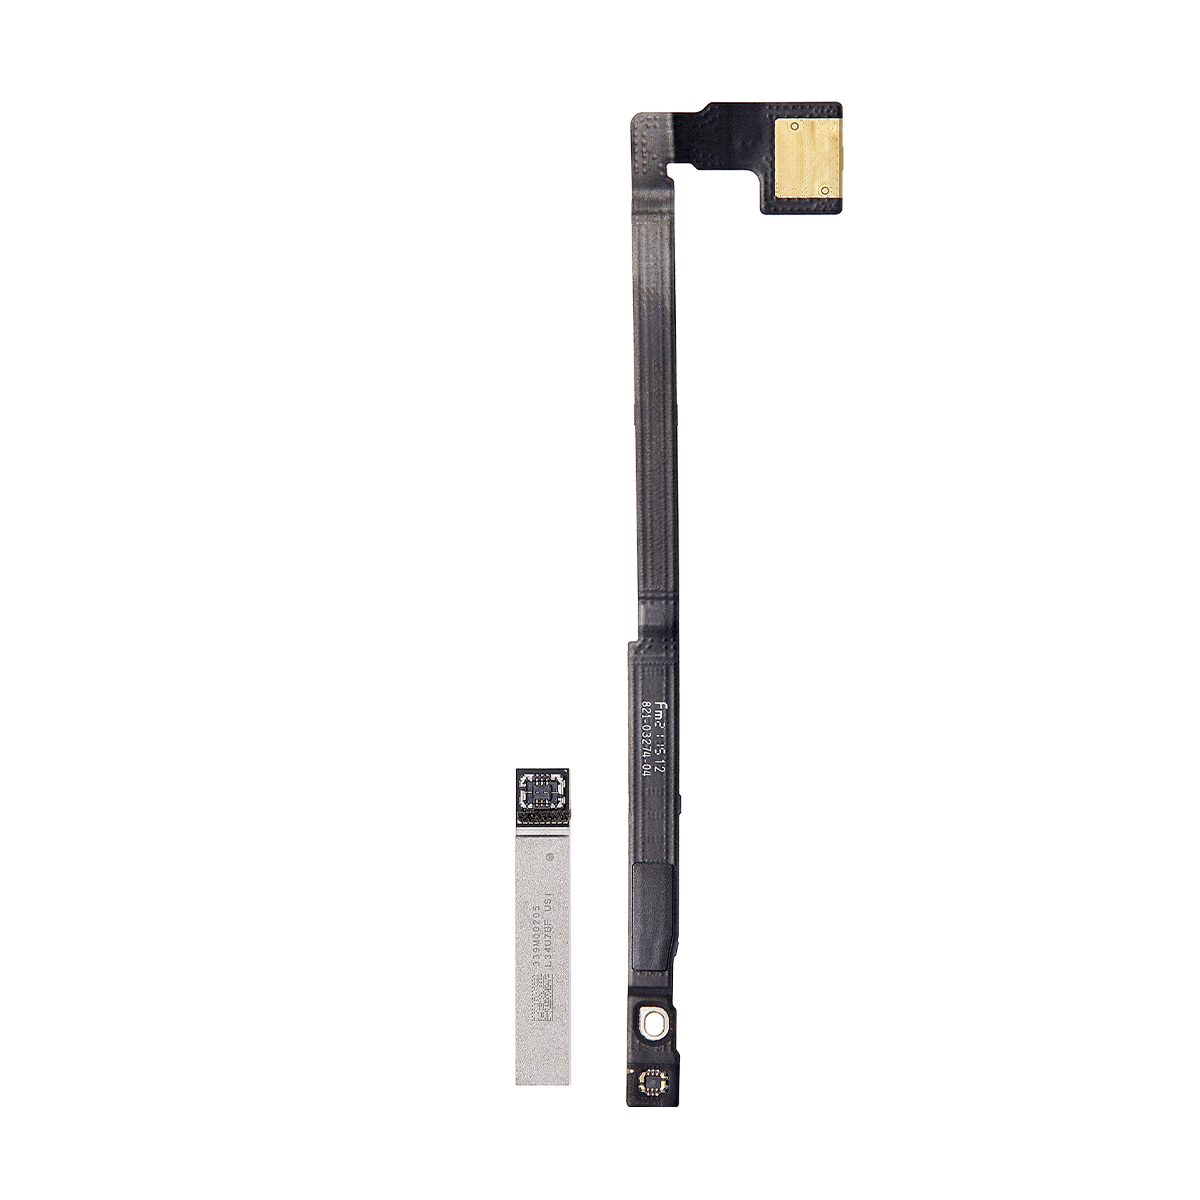 iPhone 13 Pro 5G Module and UW Antenna with Flex Cable Replacement